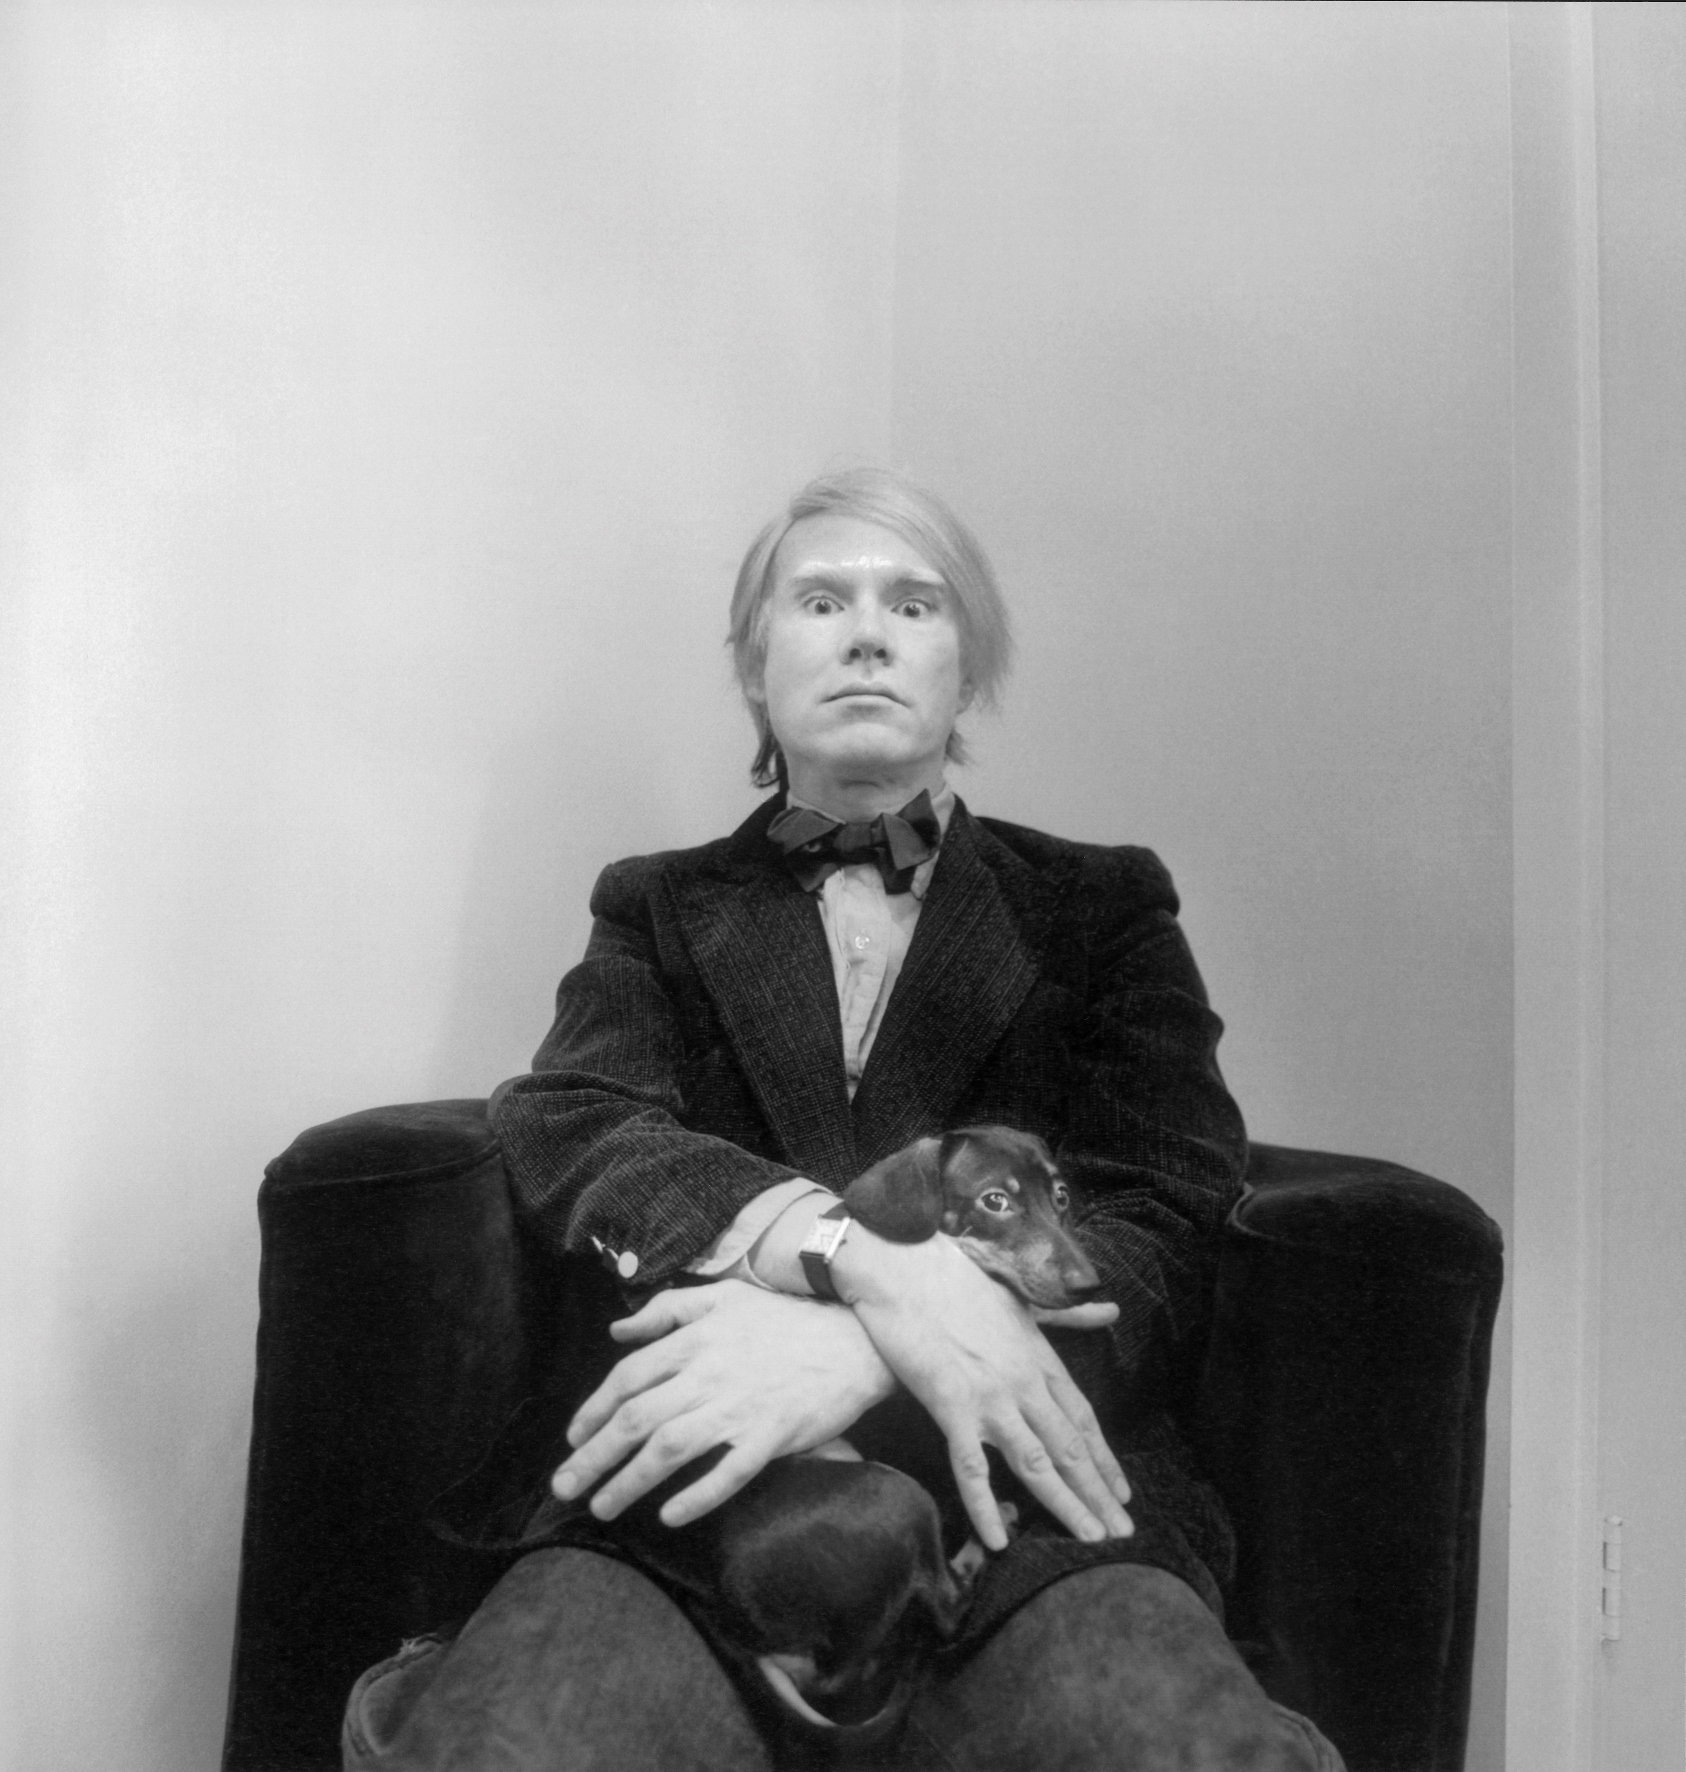 ANDY WARHOL MANDATORY CREDITS AND COPYRIGHTS Arnold Newman PropertiesGetty Images